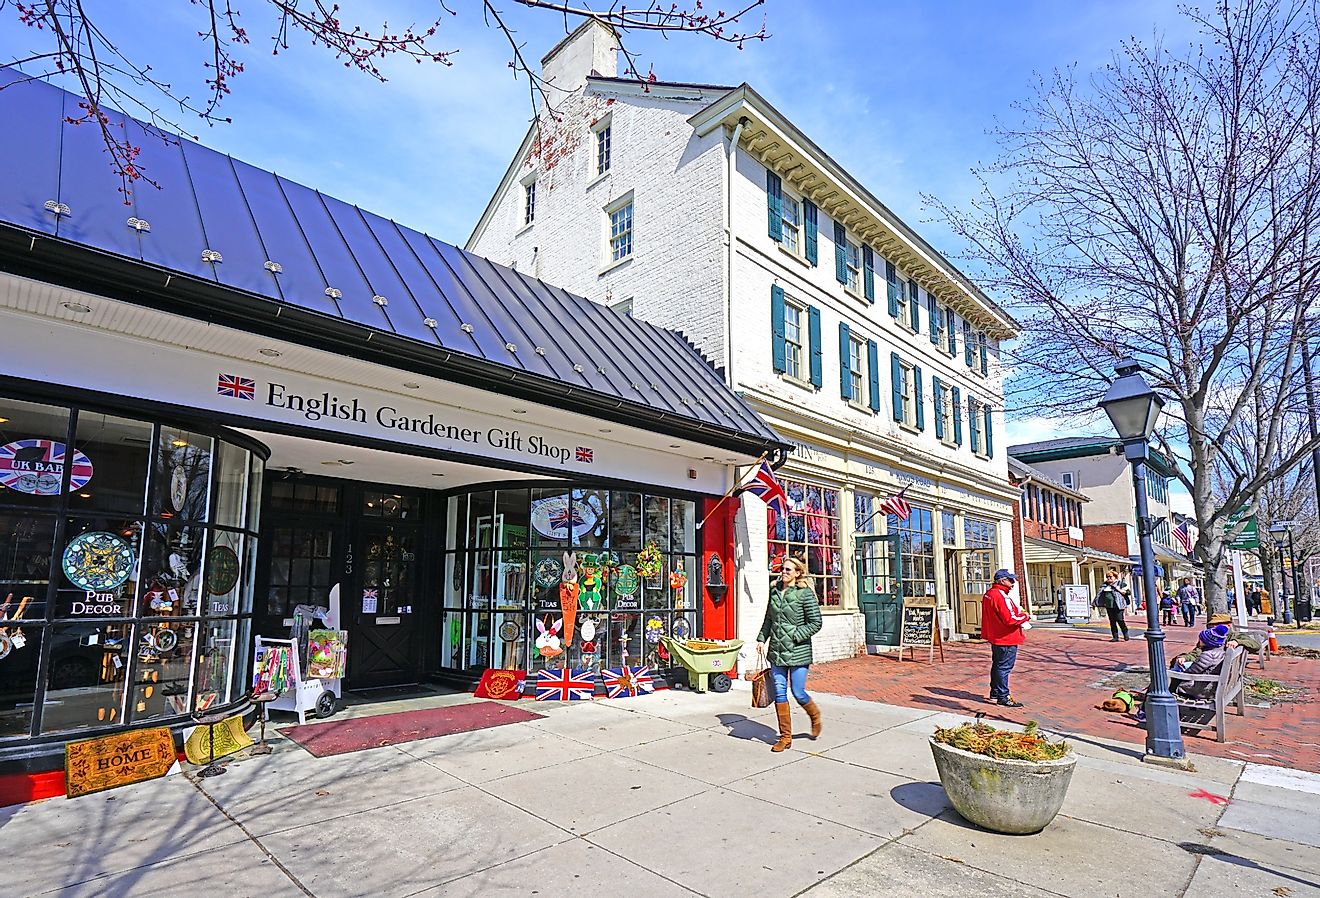 The historic downtown of Haddonfield, New Jersey. Image credit EQRoy via Shutterstock.com